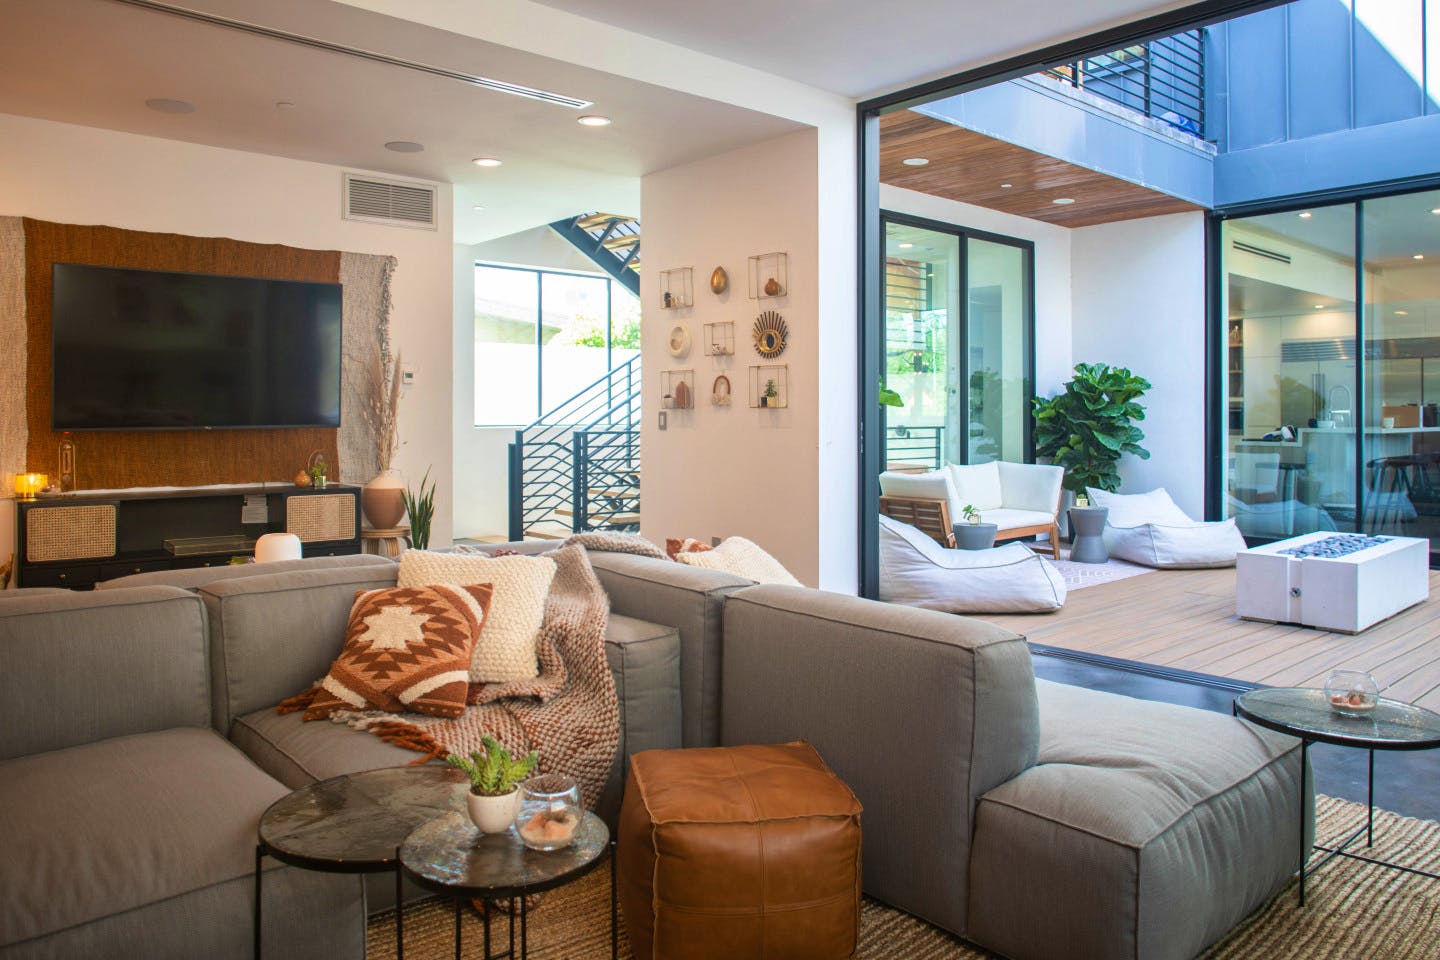 Vibrant and energetic coliving nestled in the heart of Venice Beach